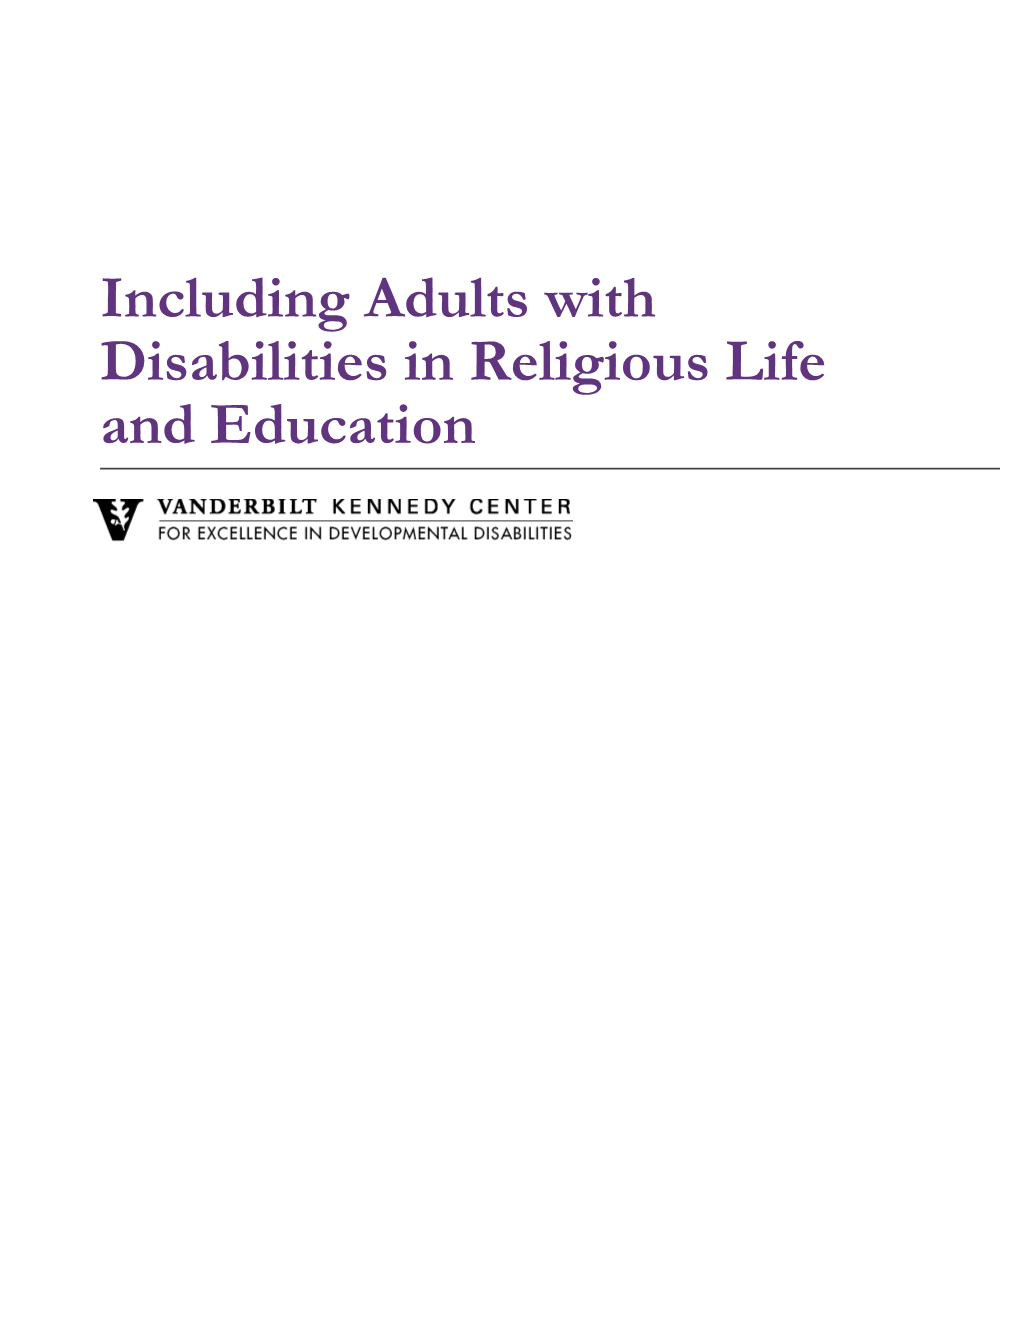 Including Adults with Disabilities in Religious Life and Education